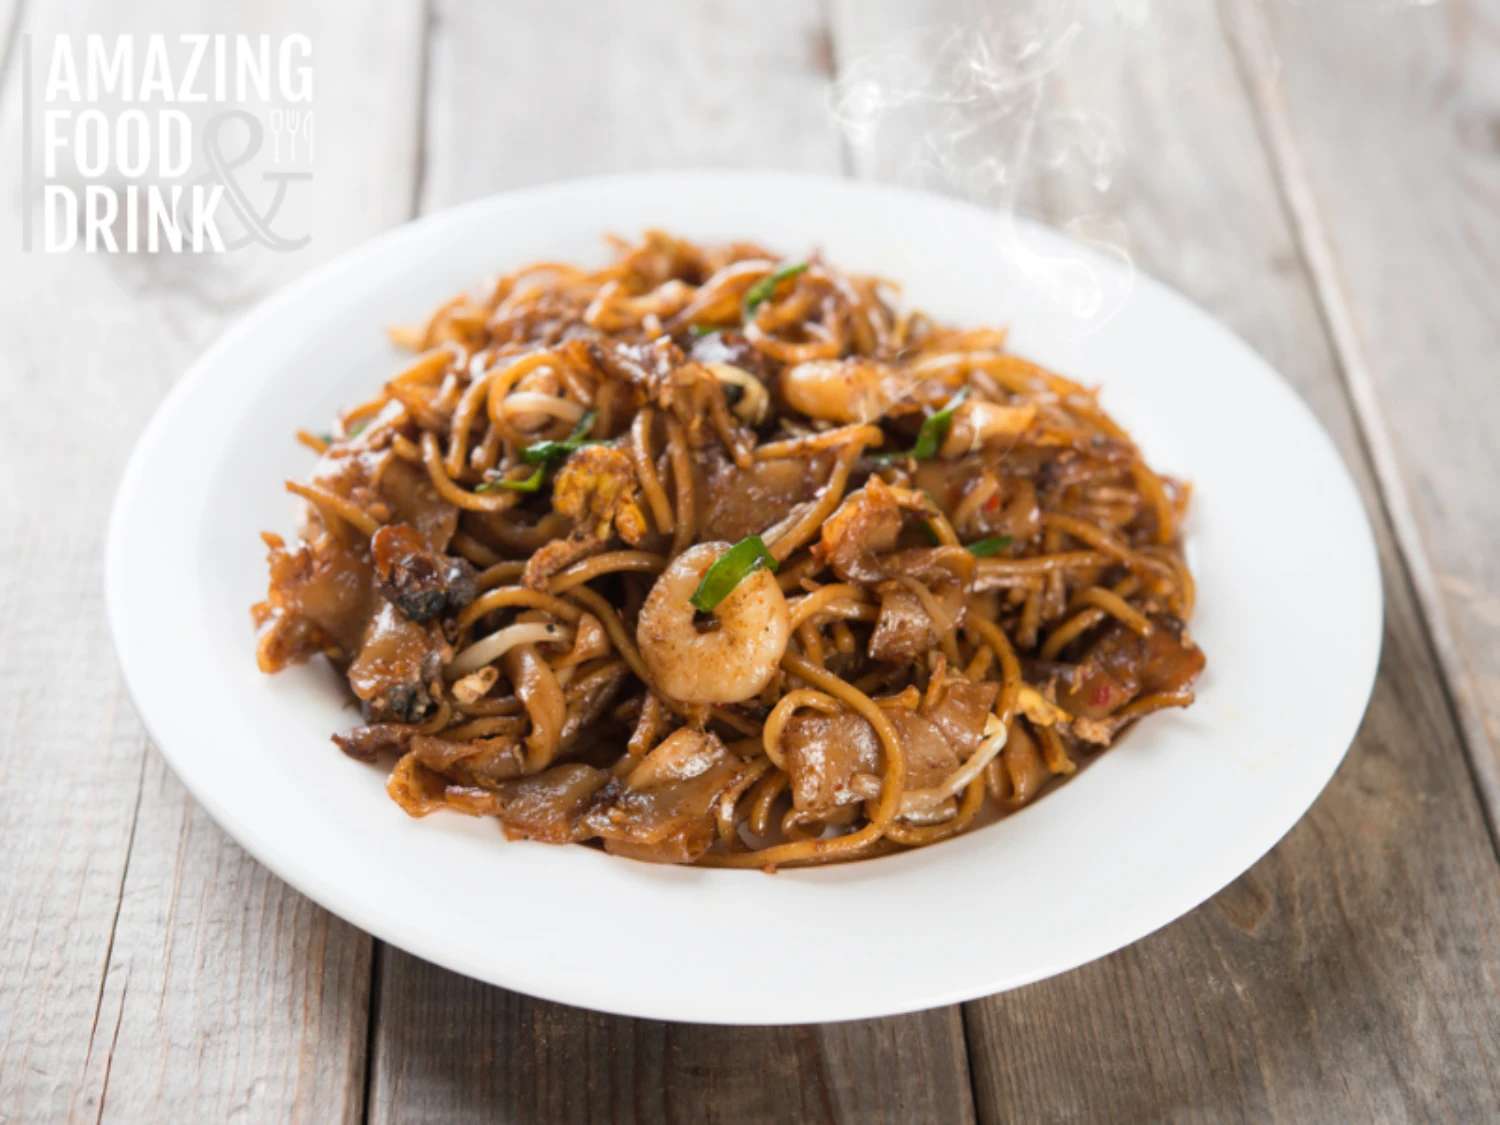 Fried Char Kuey Teow, popular noodle dish in Malaysia and Singapore